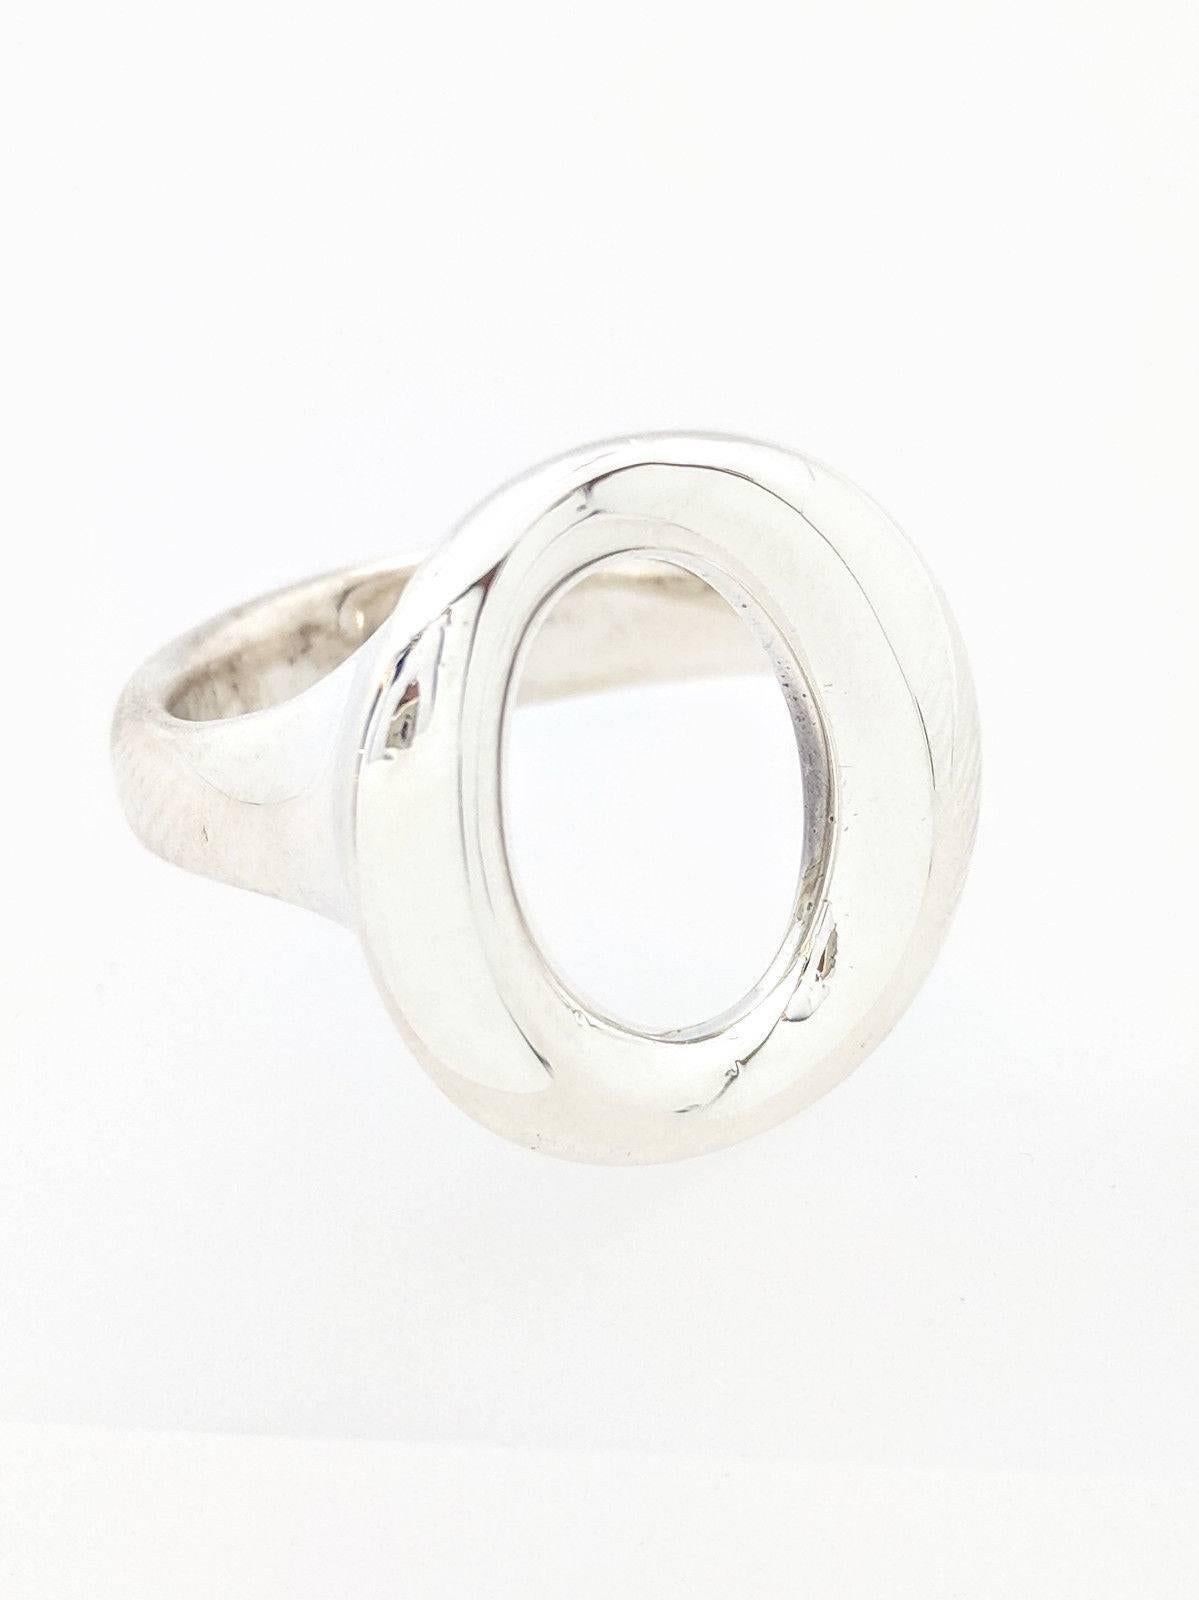 Authentic Tiffany and Co Sterling Silver Elsa Peretti Sevillana O Ring

You are viewing an Authentic Tiffany & Co. Elsa Peretti Sevillana O Ring. This ring is crafted from sterling silver, size 6.5 and weighs 9.3 grams. It is hallmarked 